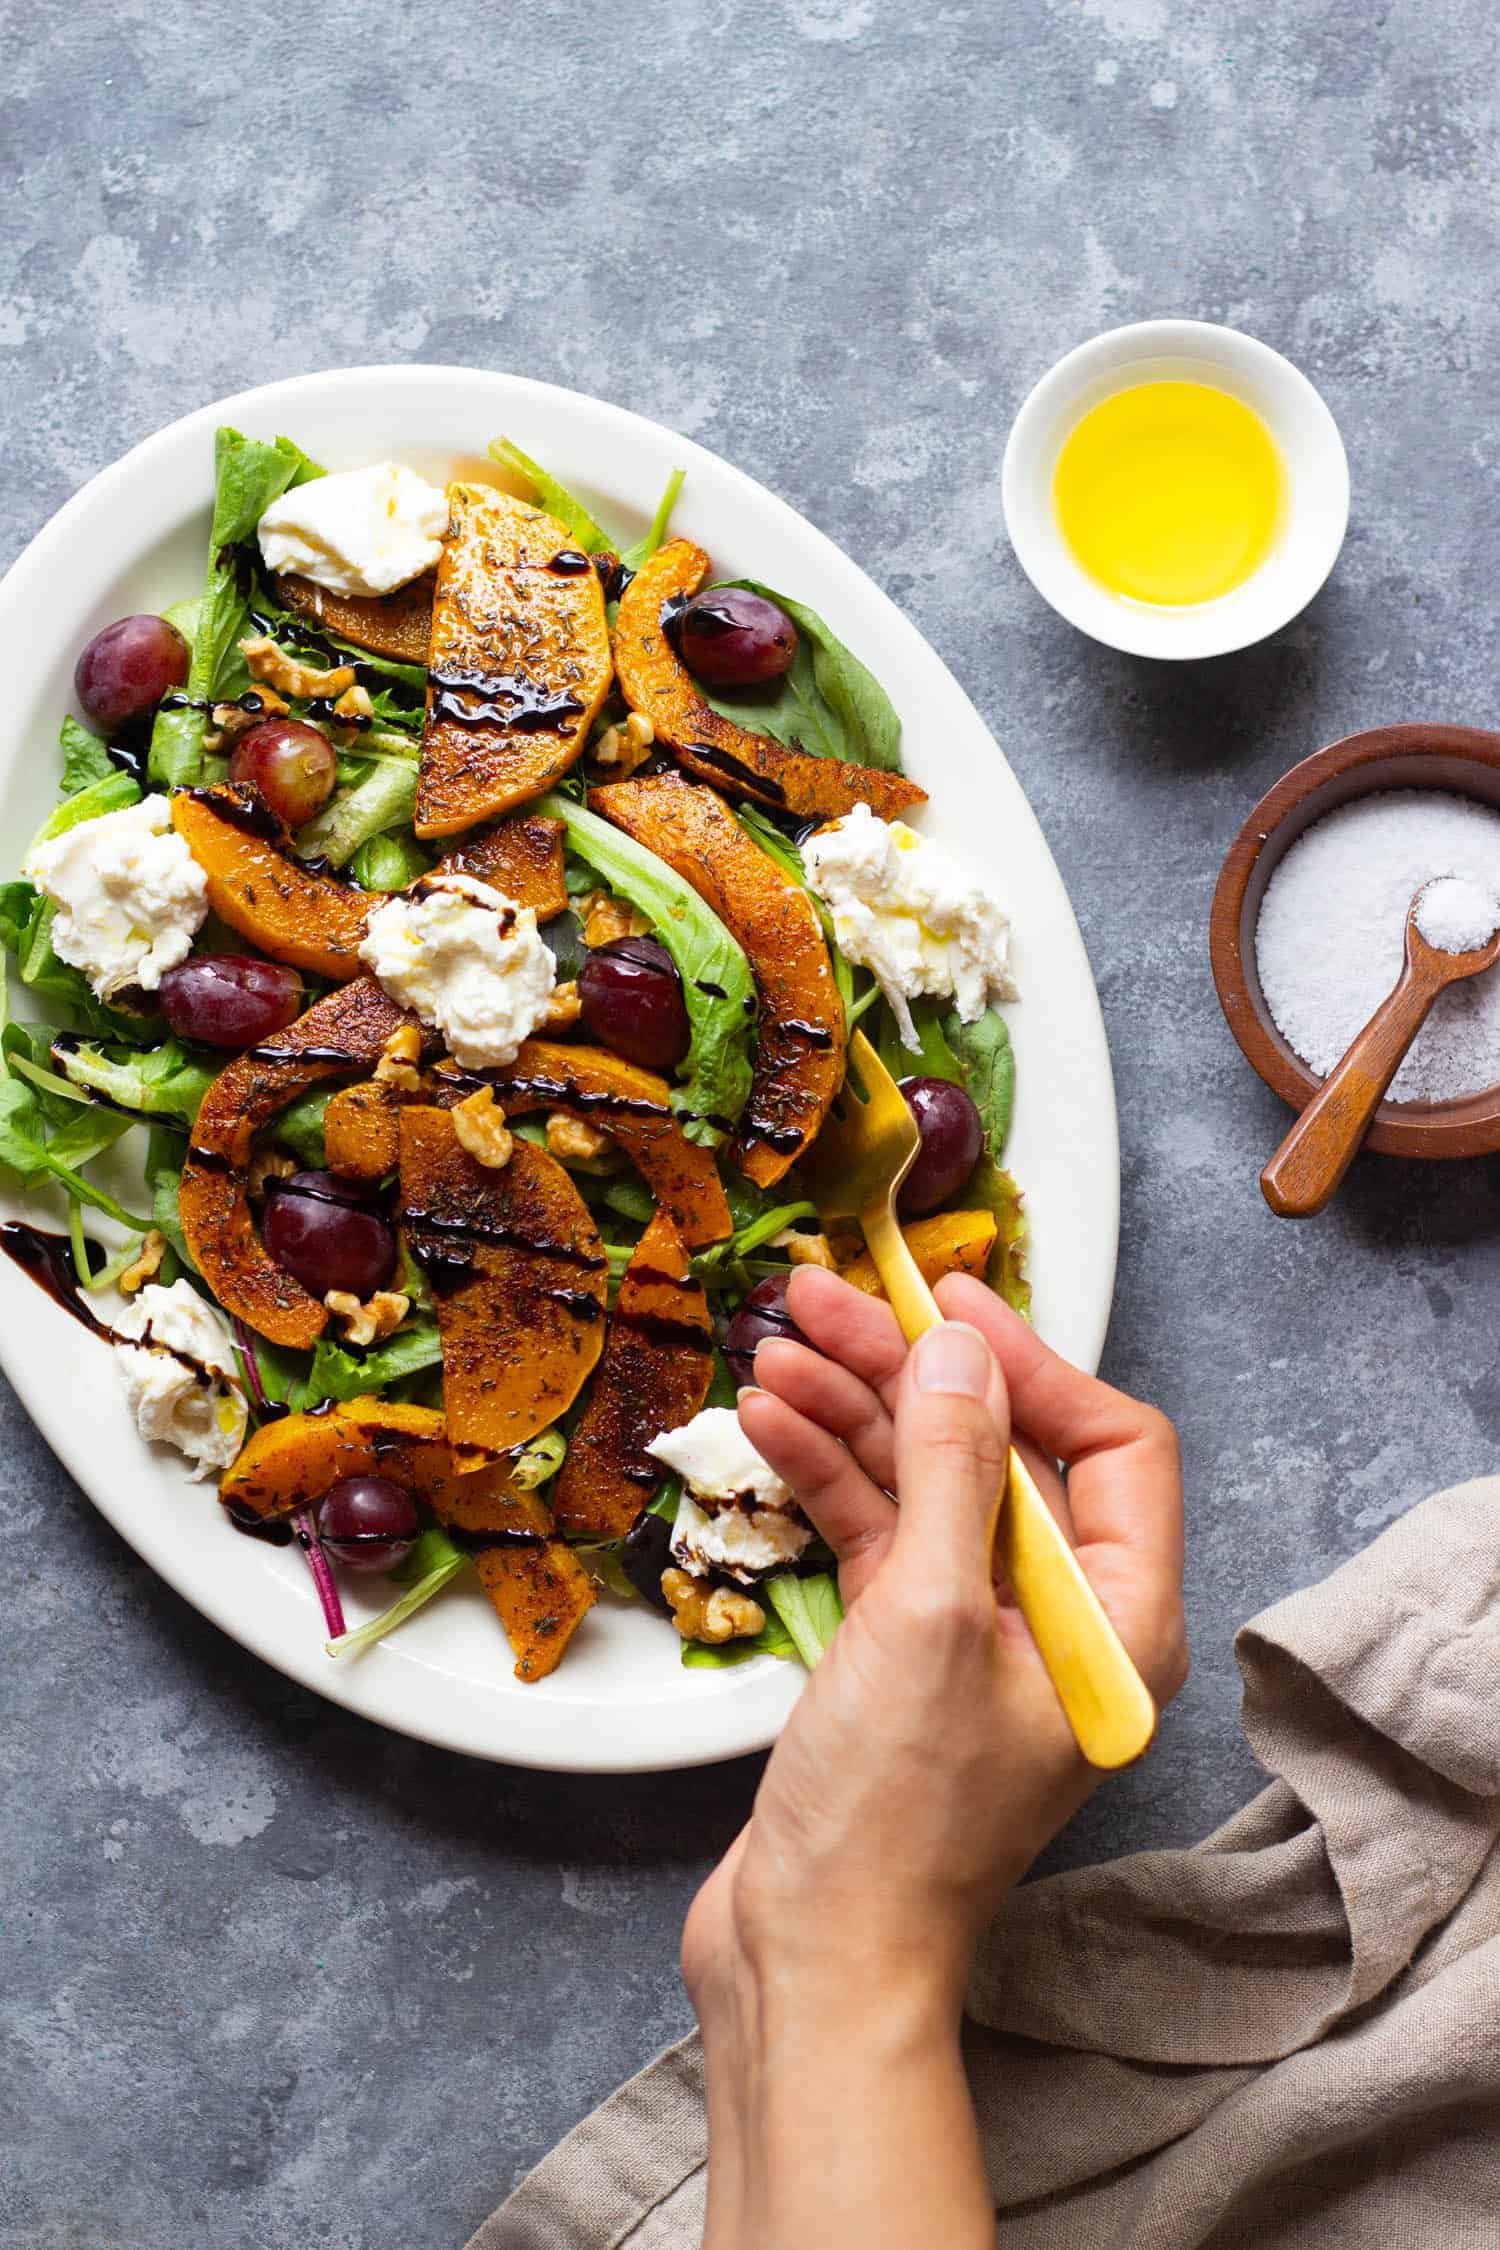 Roasted butternut squash salad is a great fall salad recipe. With burrata, grapes, and a balsamic based vinaigrette, this salad will excite your taste buds!
